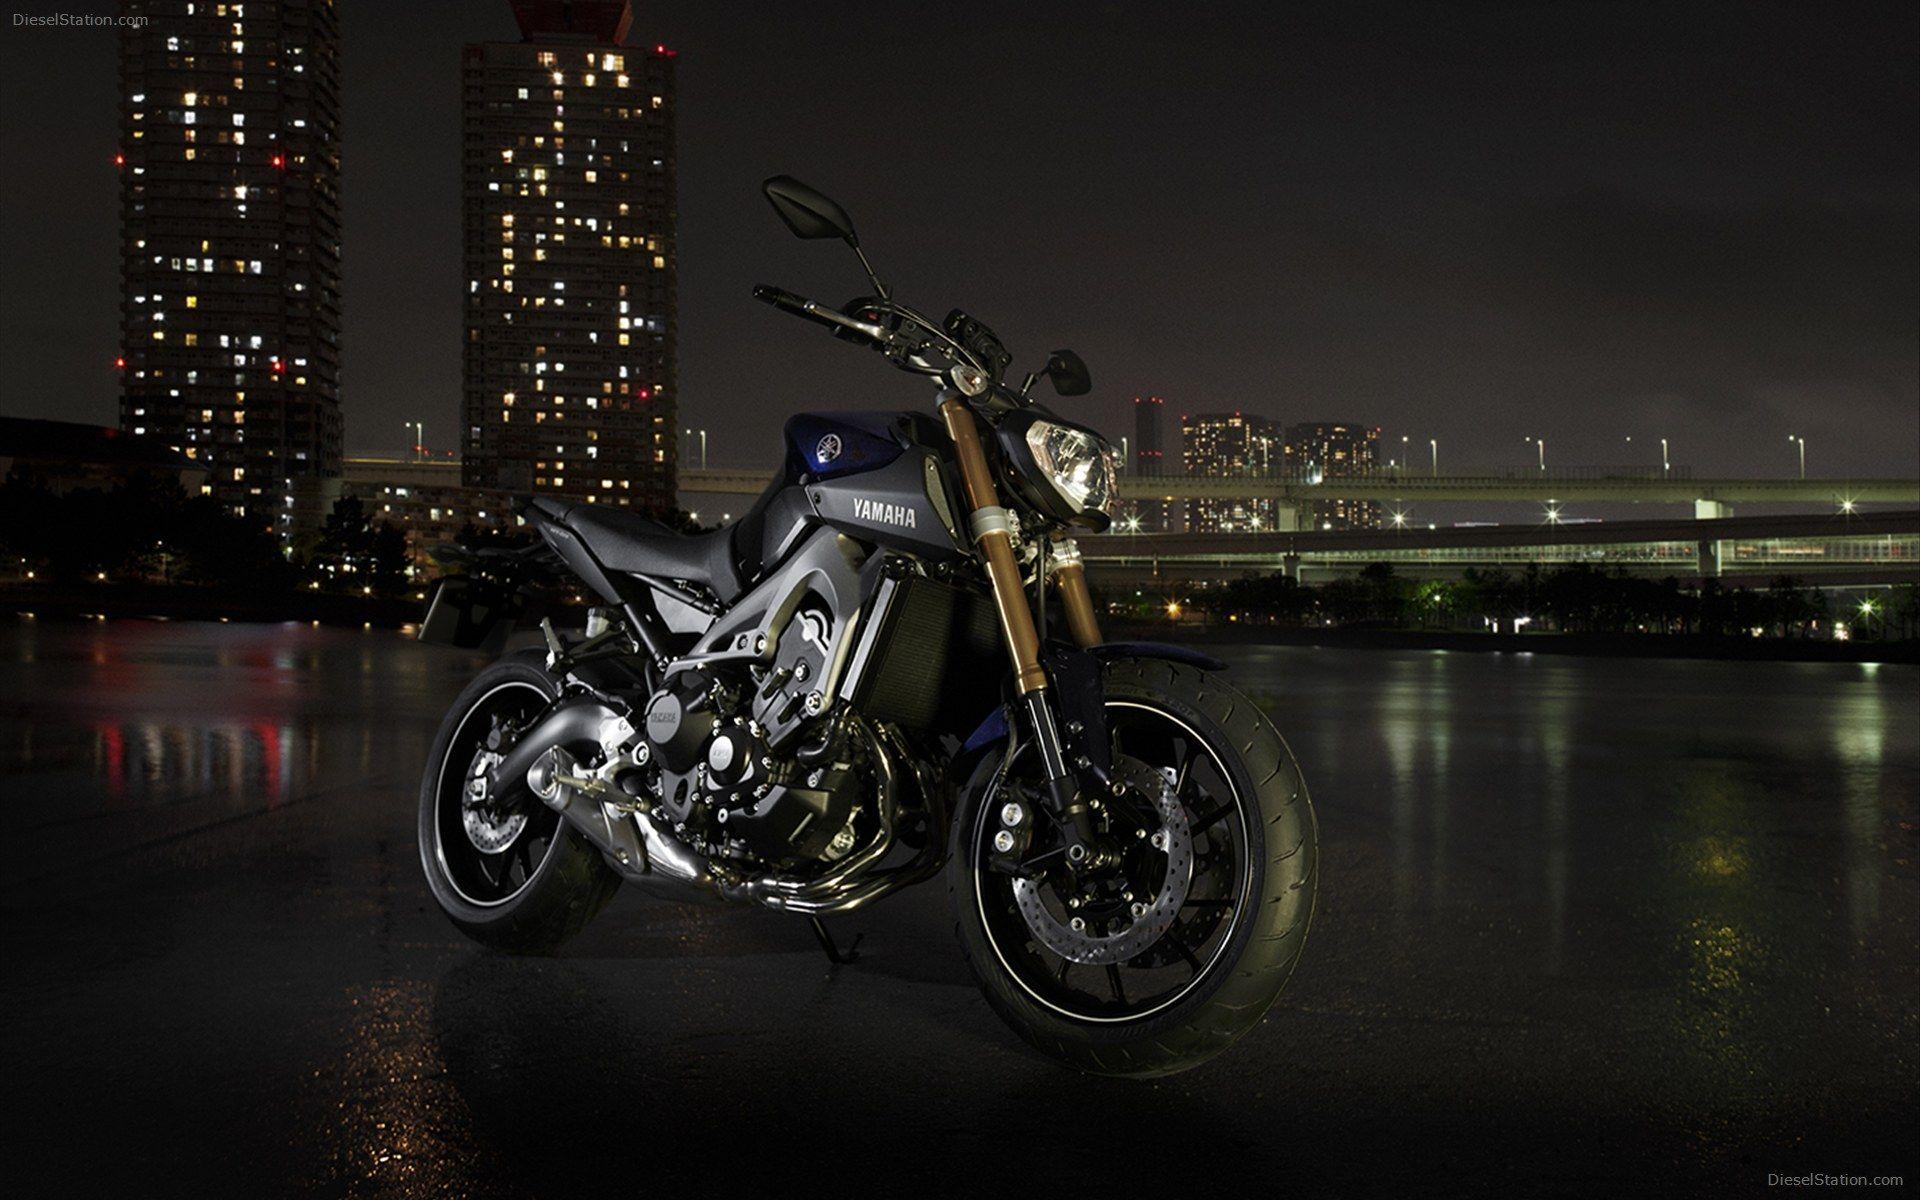 Yamaha MT 09 2014 Widescreen Exotic Car Image Of 18, Diesel Station